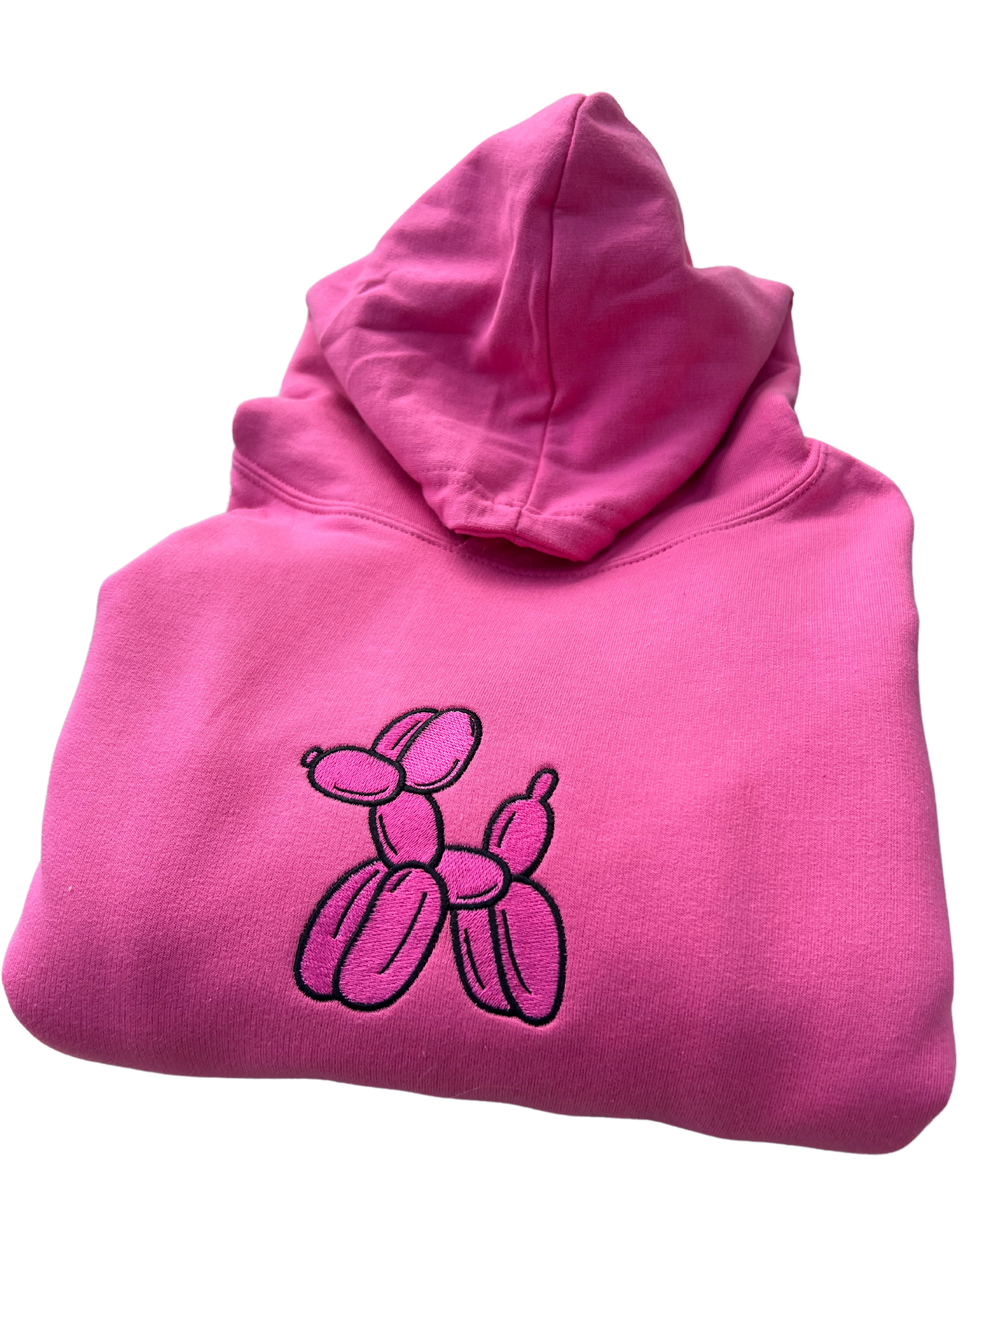 Balloon Dog Hoodie - Candy Floss Pink